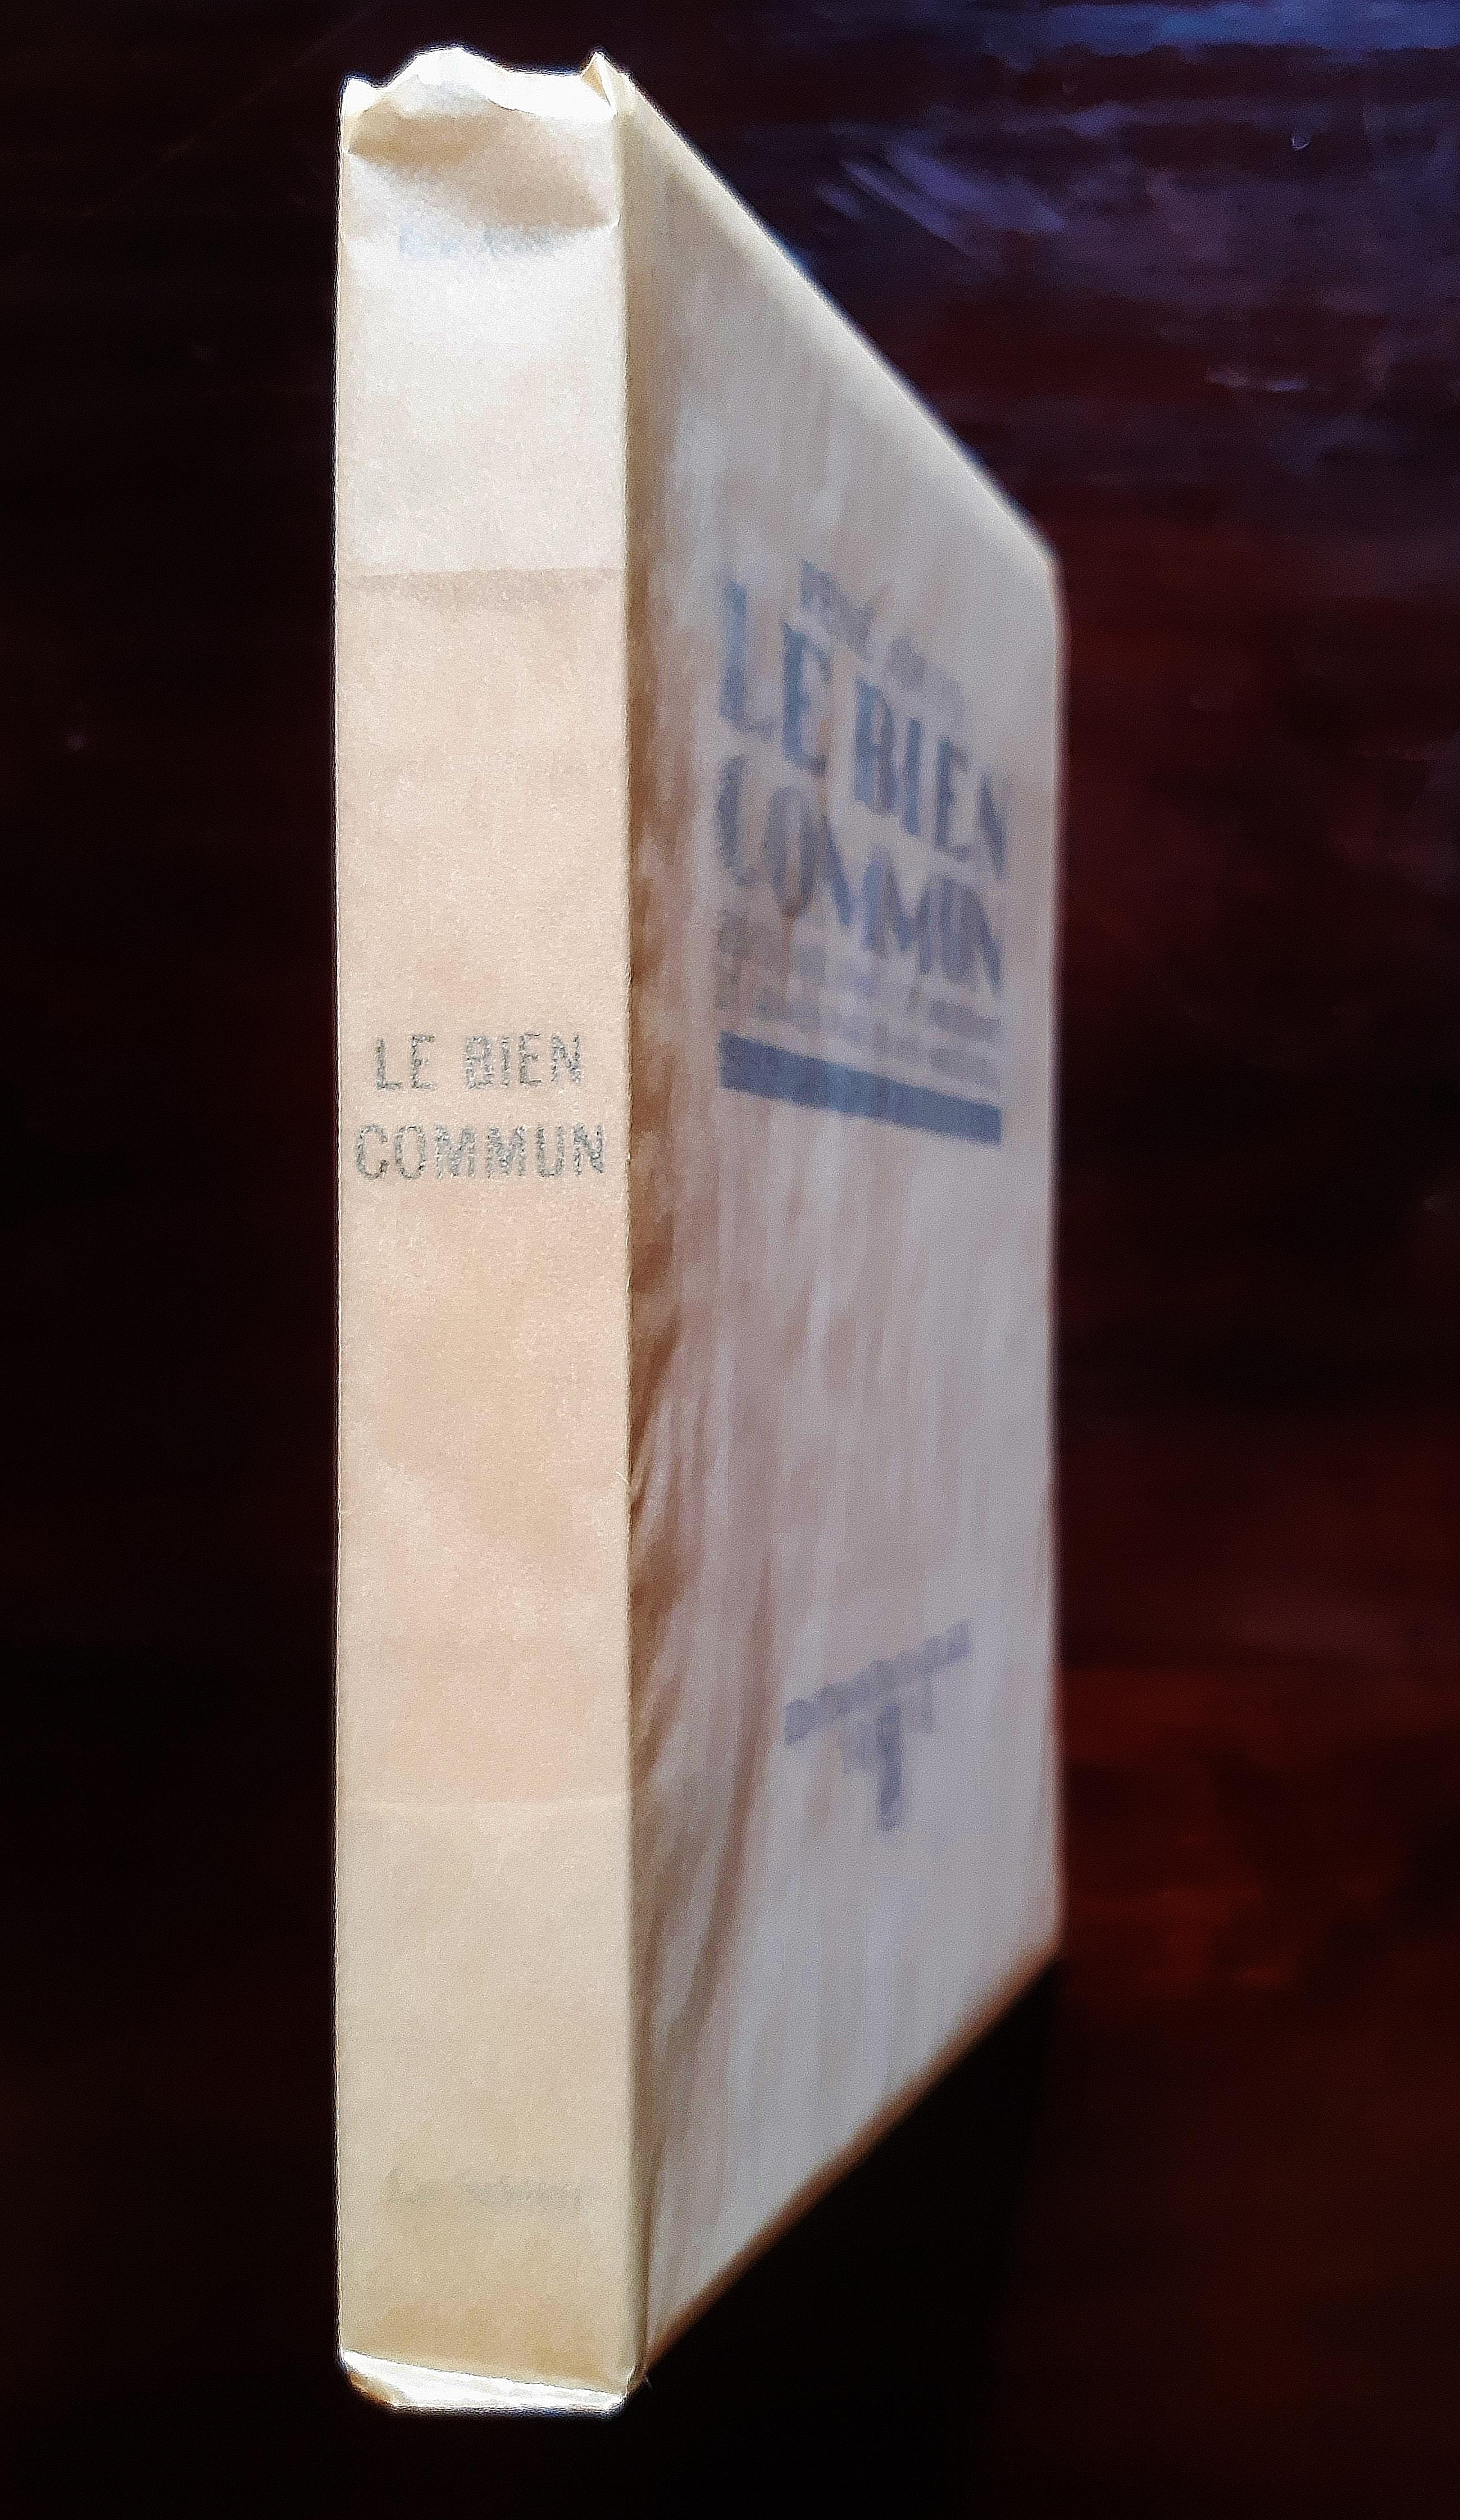 Le Bien Commun - Rare Book Illustrated by Frans Masereel - 1919 1